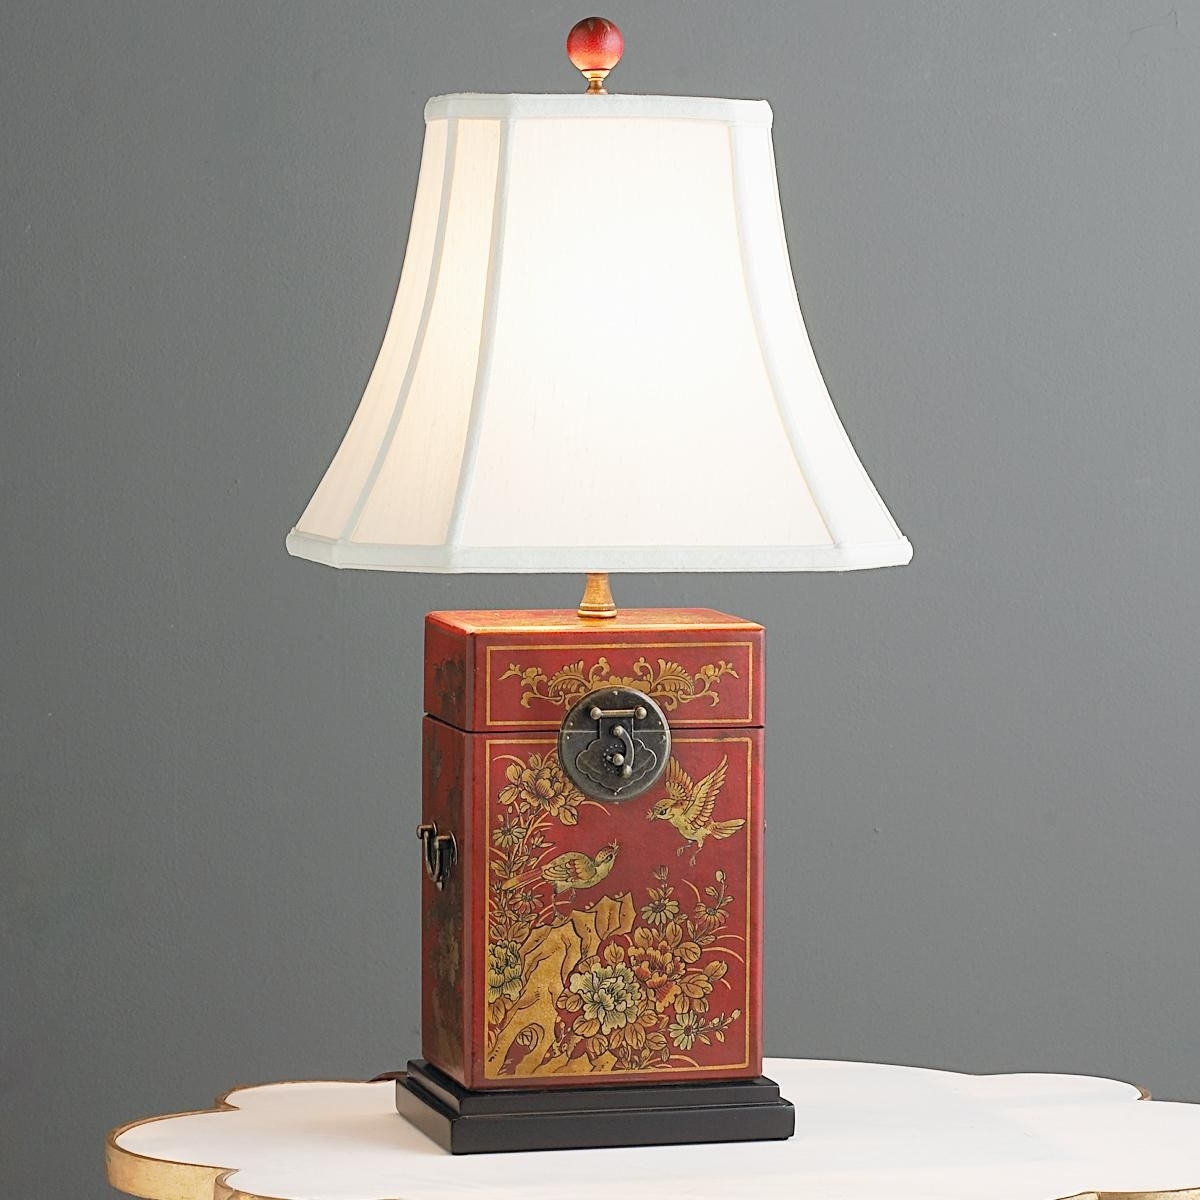 White Paper Shade Lattice Pattern Table Bedside Brown Touch Oriental Square Lamp 